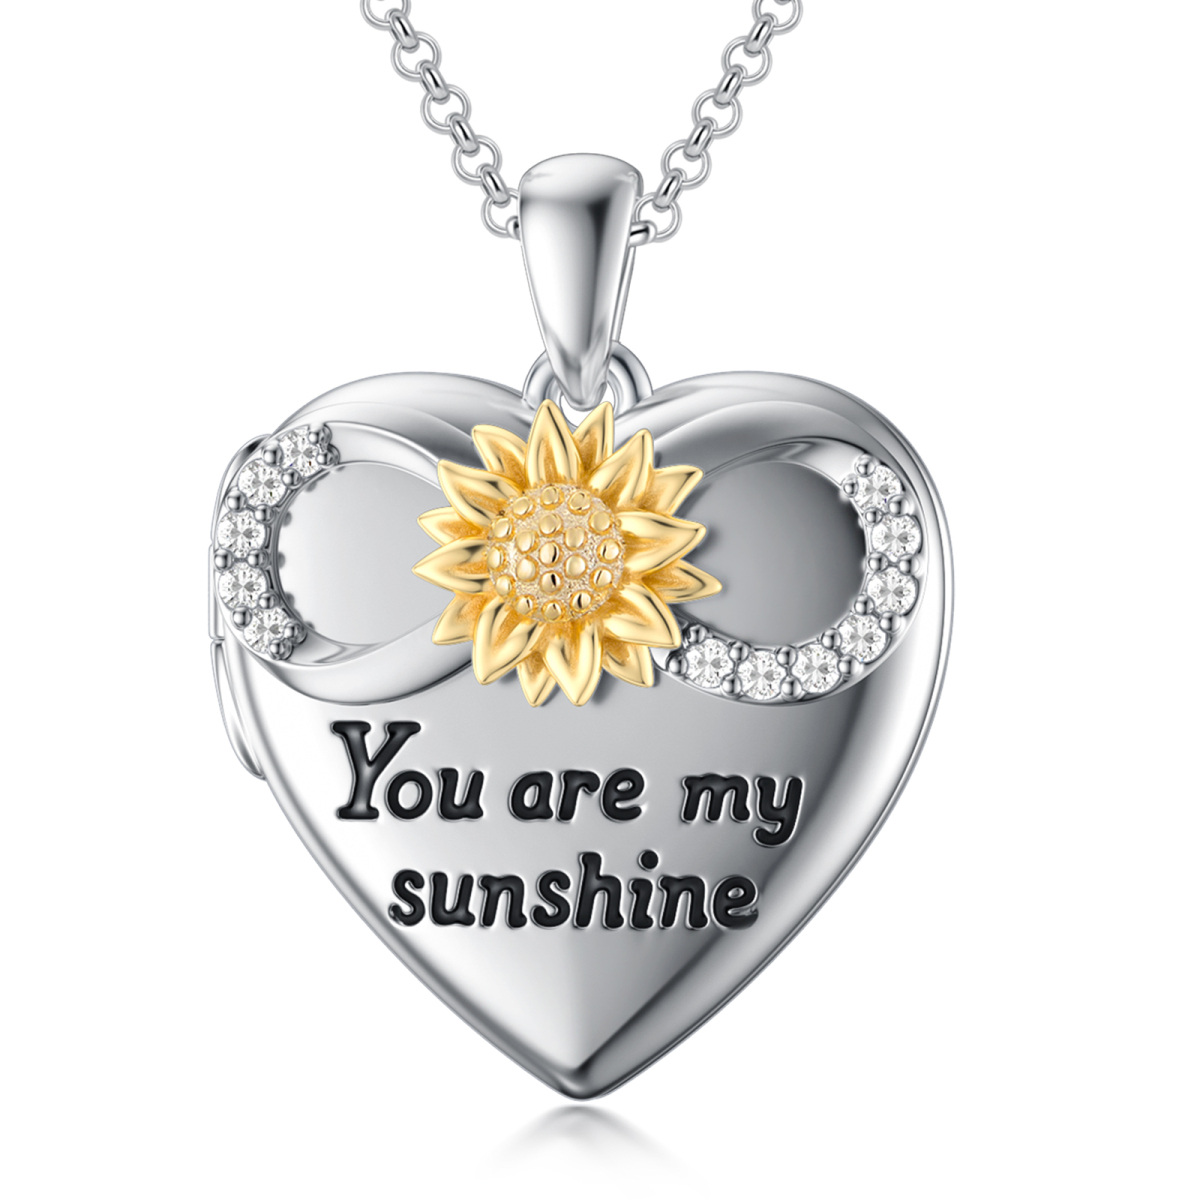 10K White Gold Cubic Zirconia Sunflower Pendant Necklace with Engraved Word-1